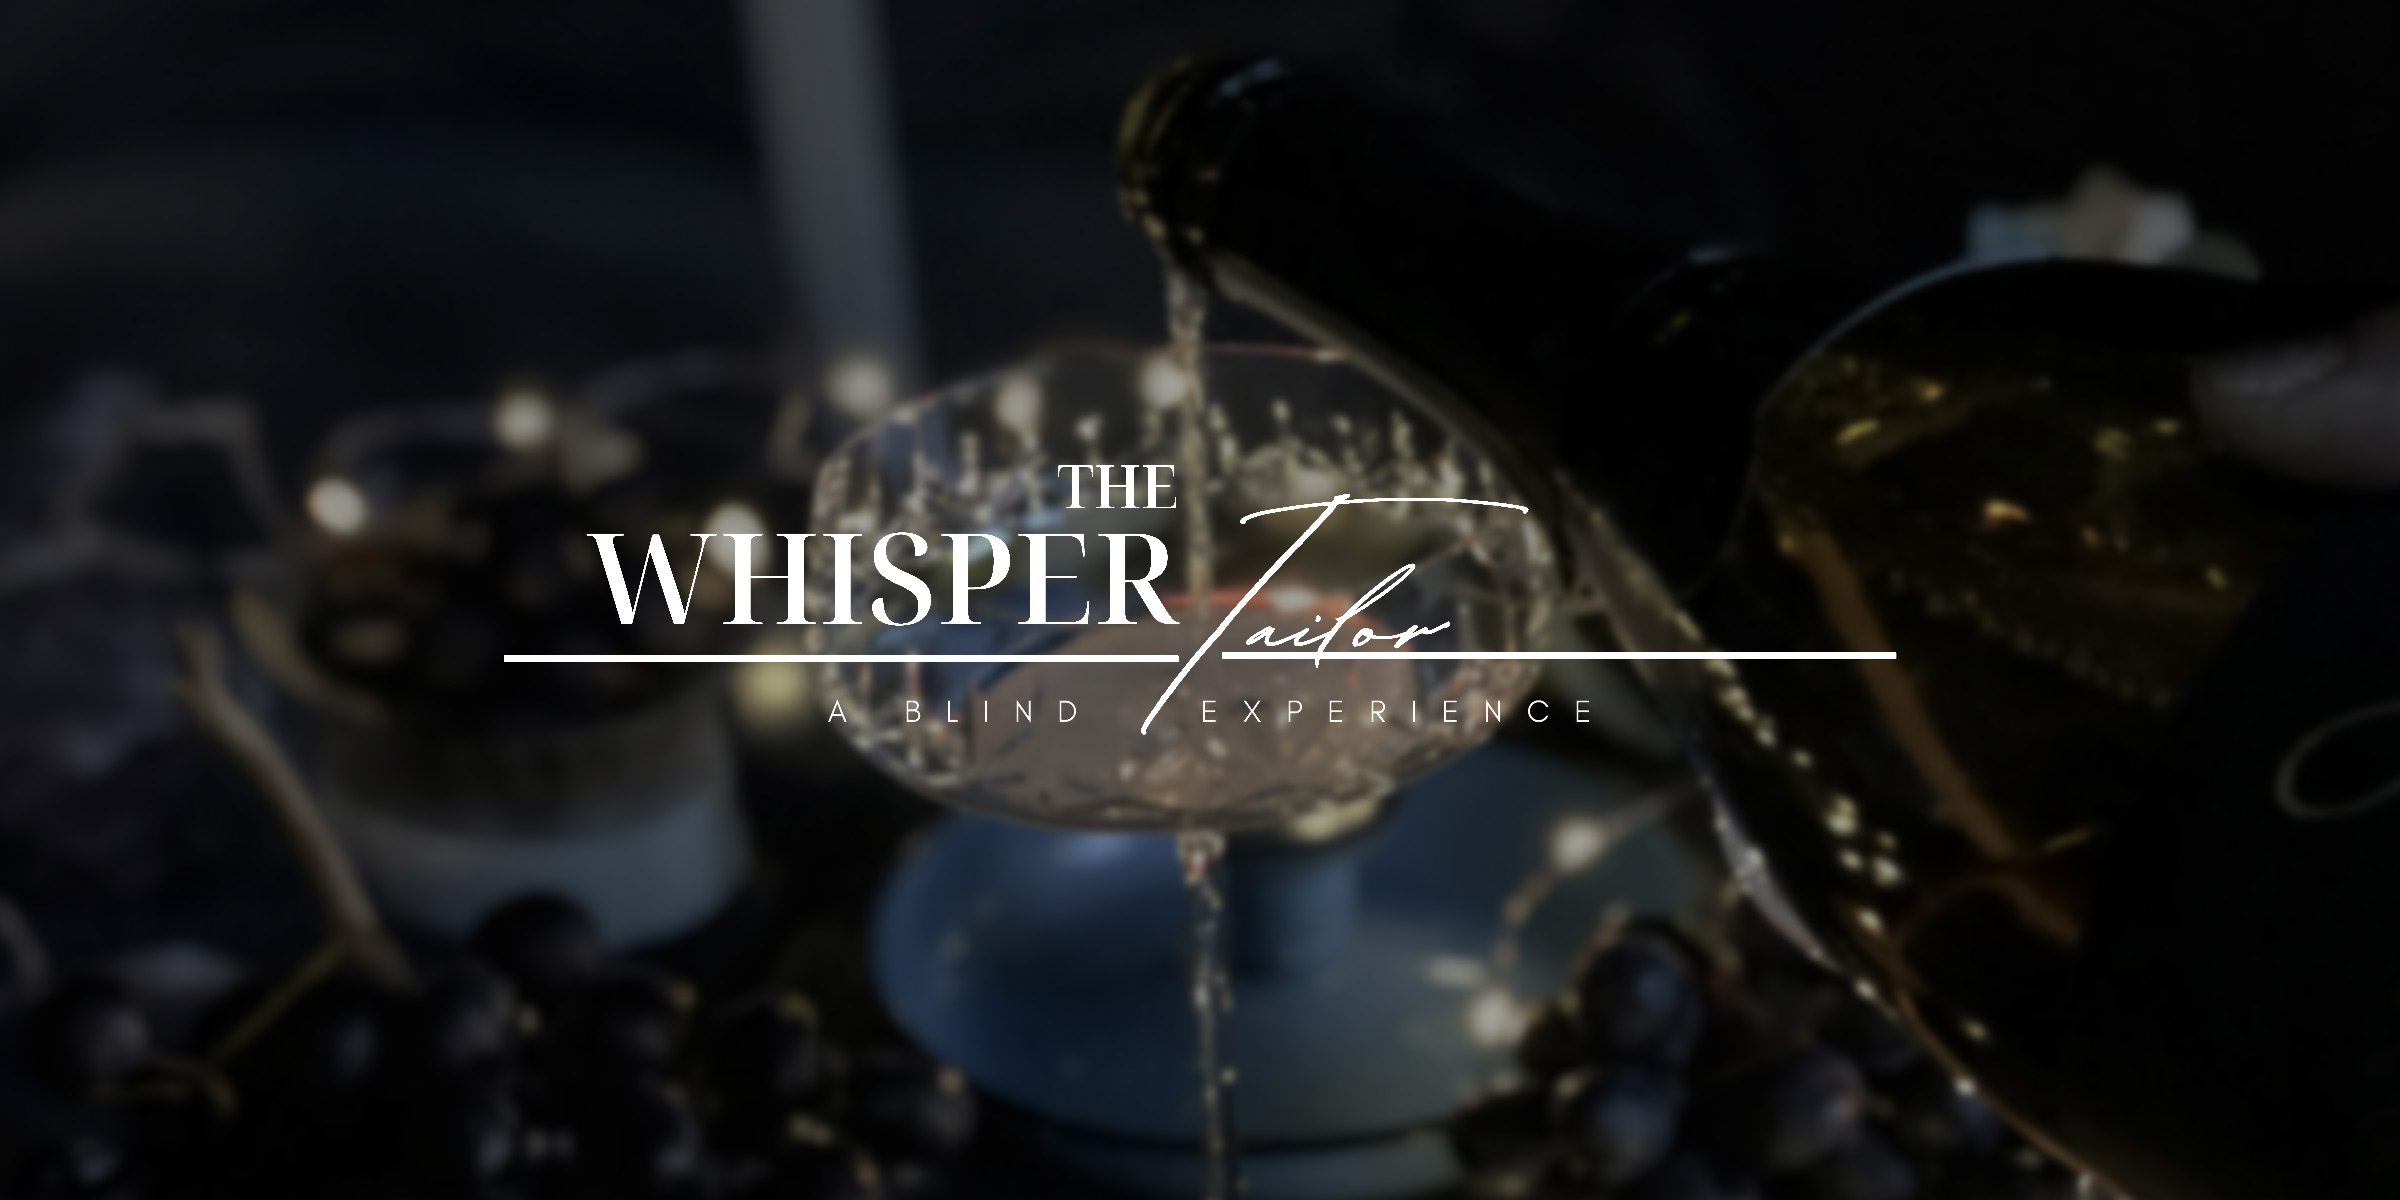 the-whipser-tailor-blind-experience-cover-pombo